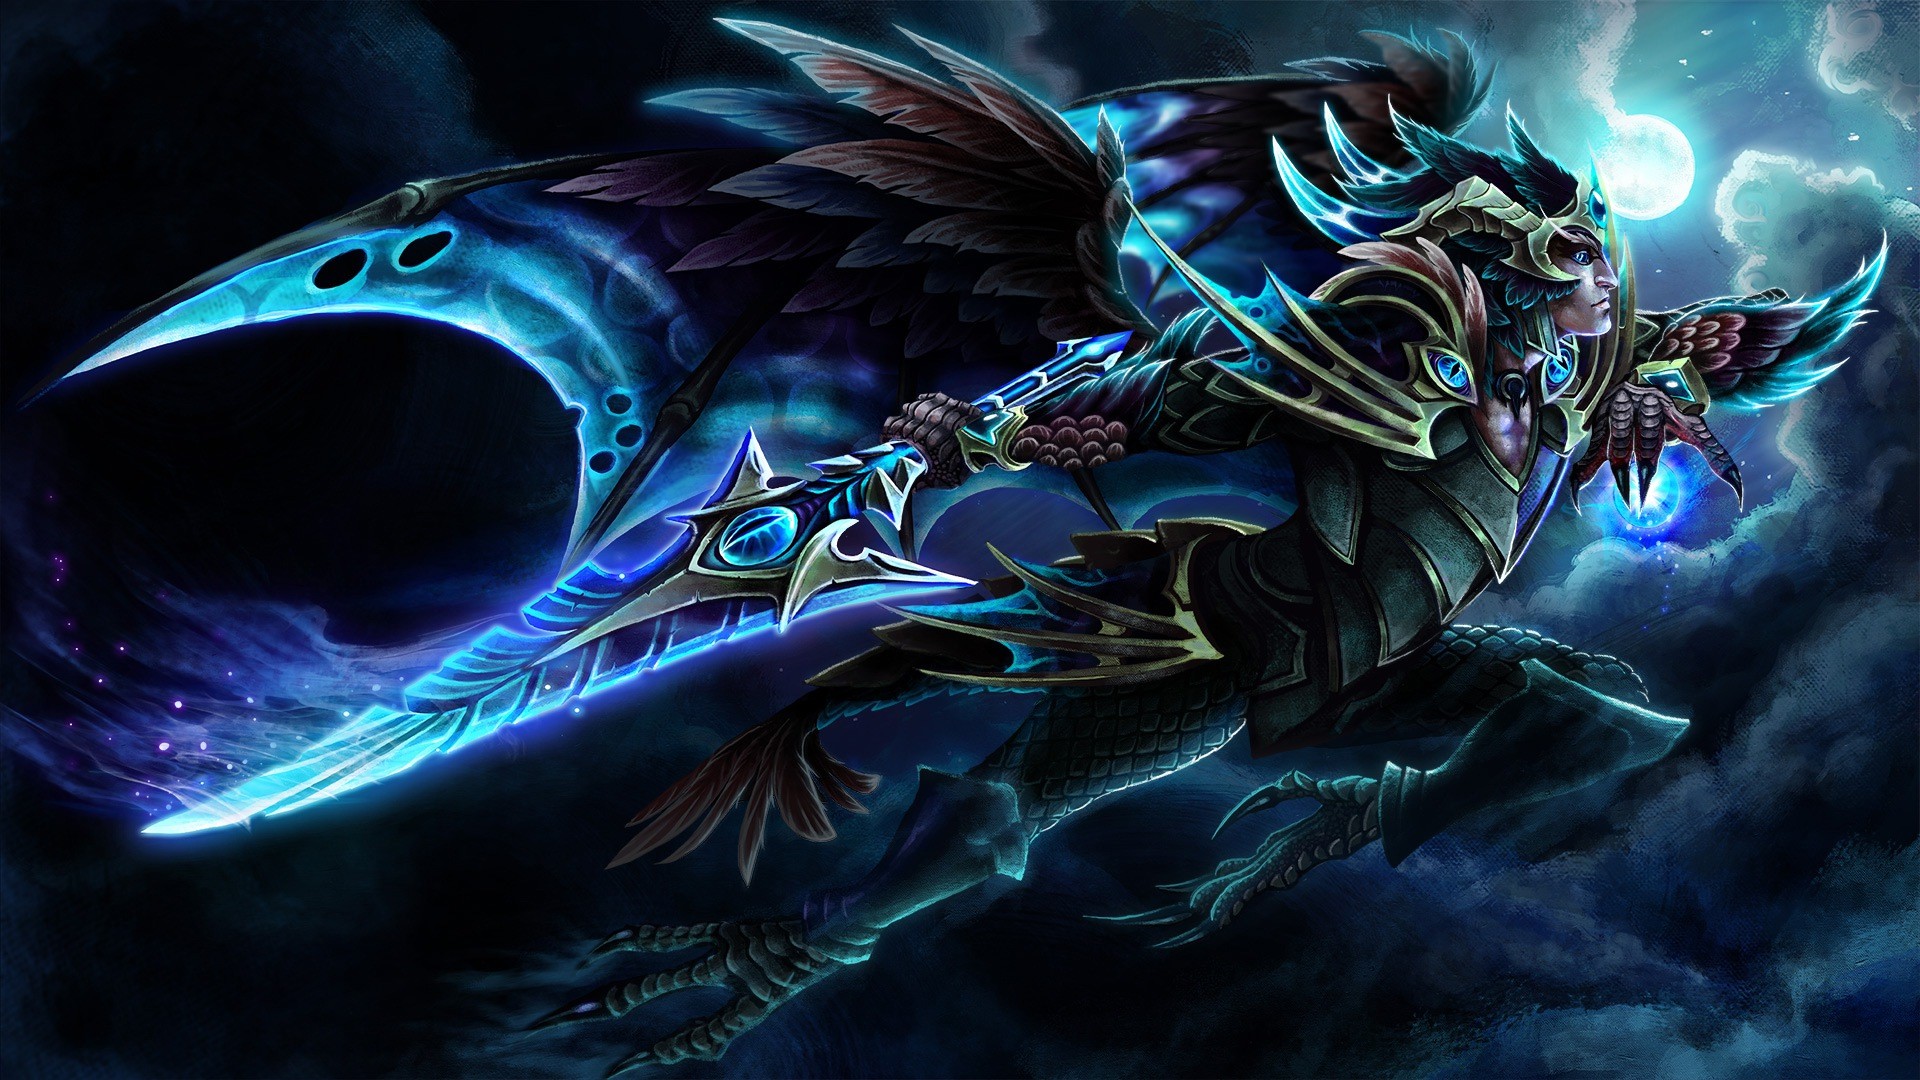 1920x1080 ... Best Of Dota 2 Loading Screen Wallpapers Hd Desktop and Mobile .